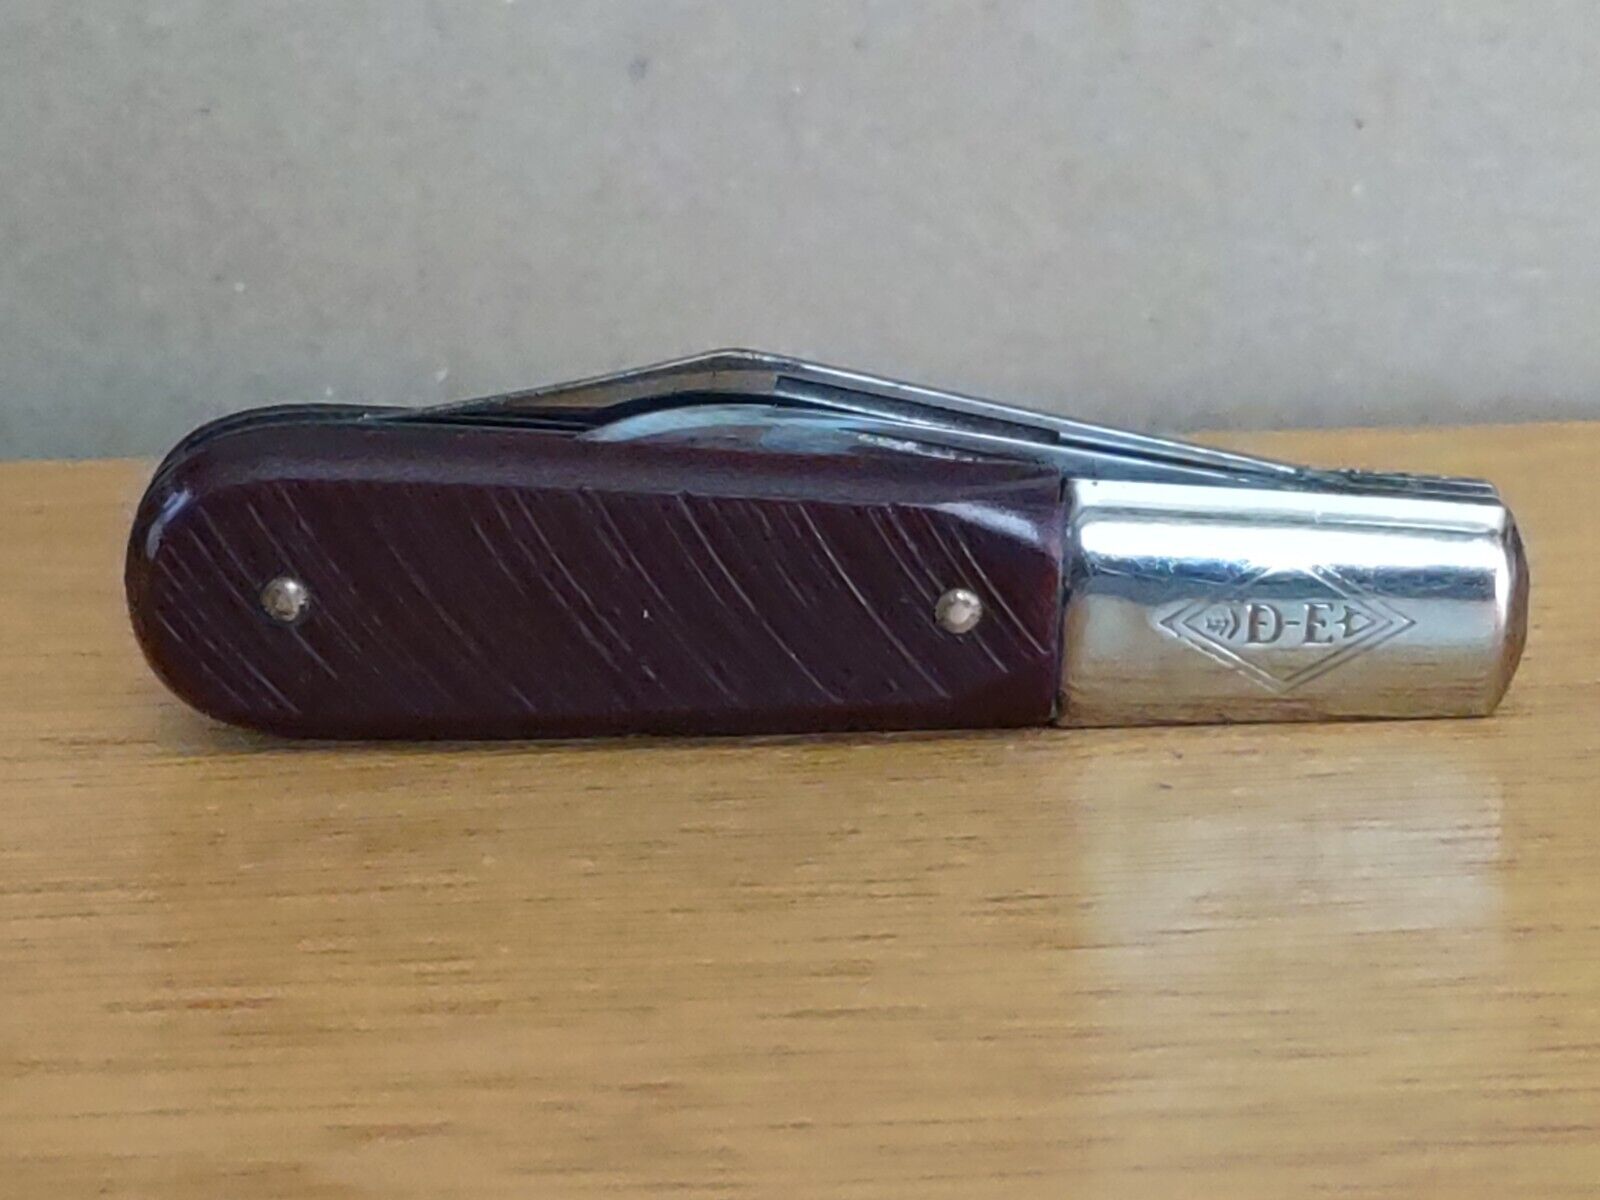 Vintage Imperial Diamond Edge / Barlow Two Blade Pocket Knife in Good Condition